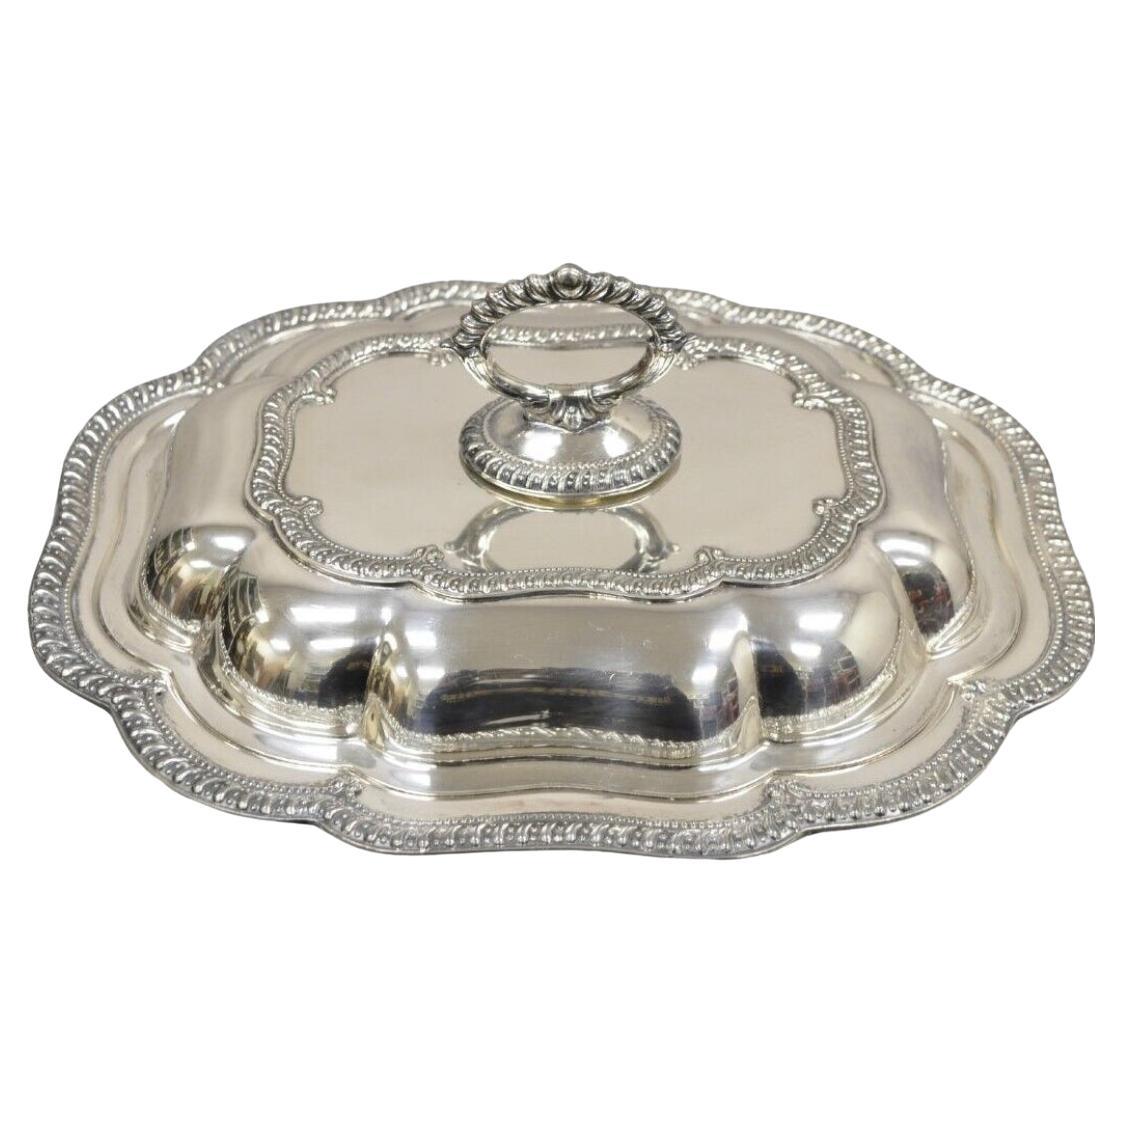 Vintage English Victorian Silver Plated Scalloped Covered Serving Platter Dish For Sale